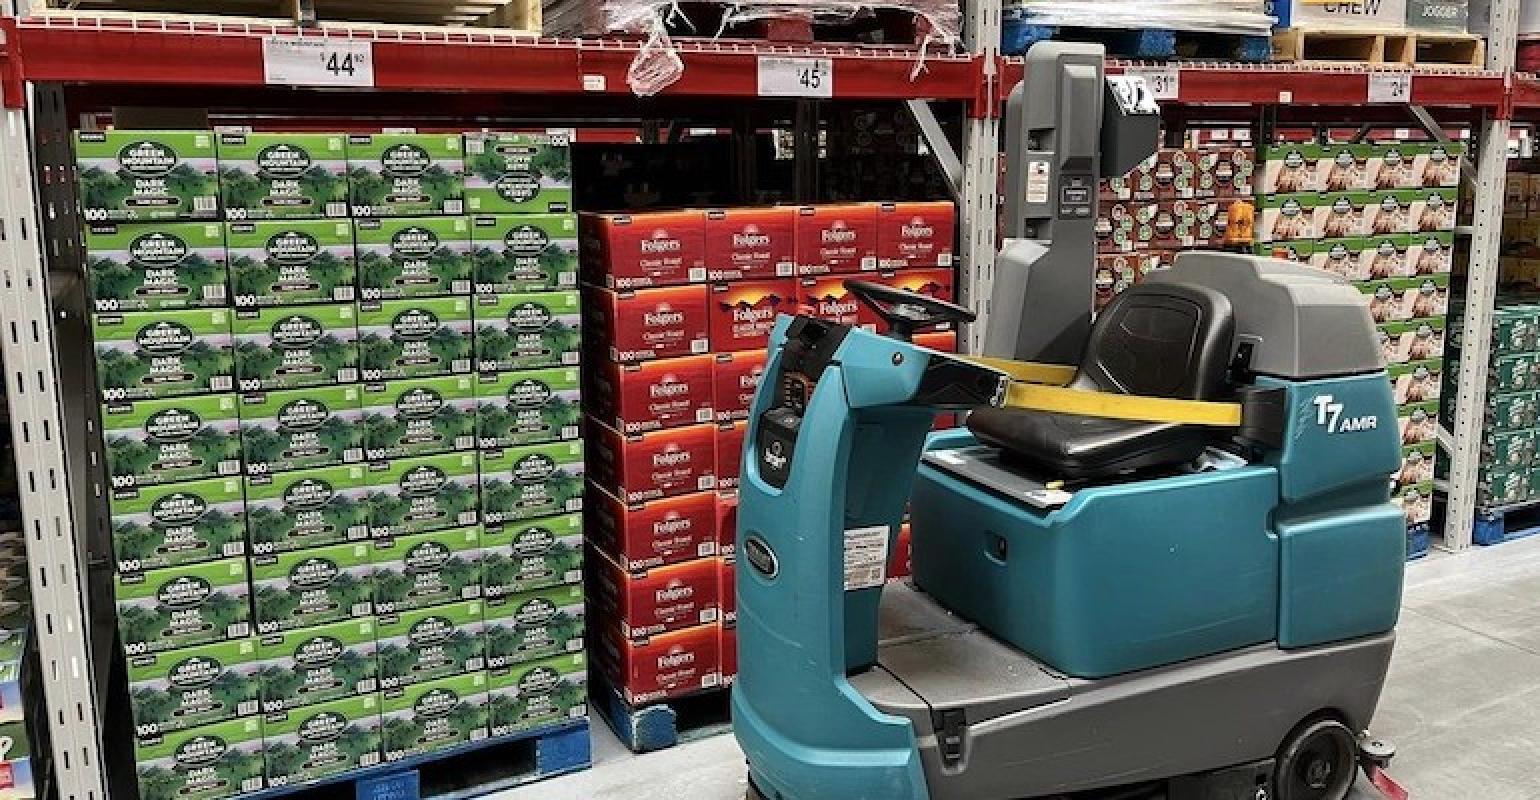 Sam's Club rolls out its super-smart floor scrubbers chainwide